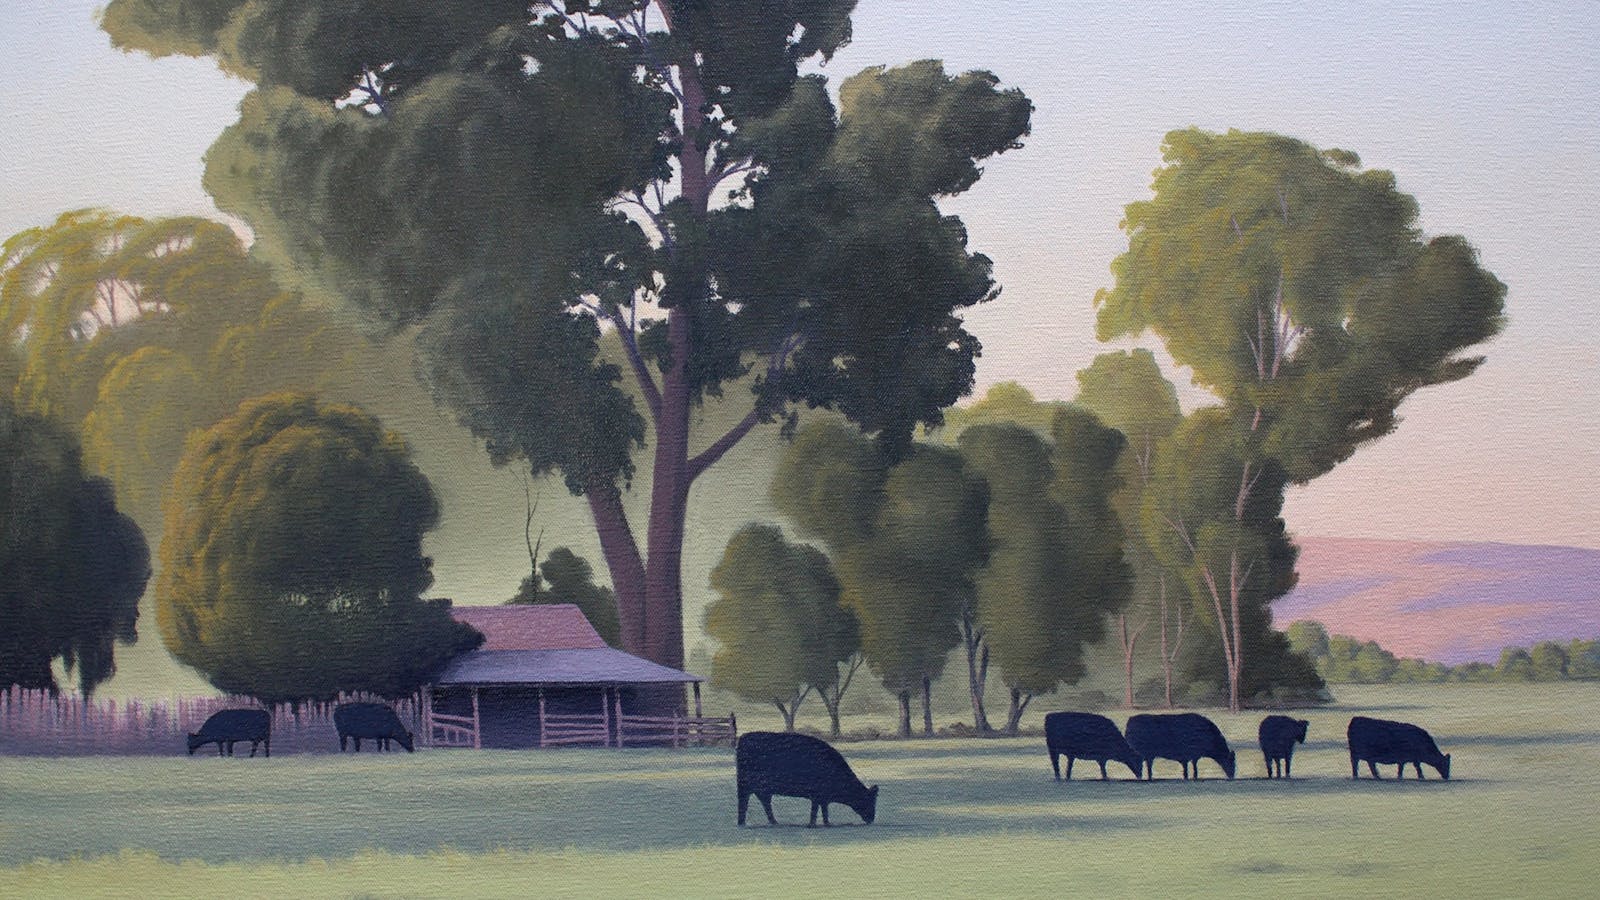 Cows at Cradoc. An Oil Painting by Richard Stanley